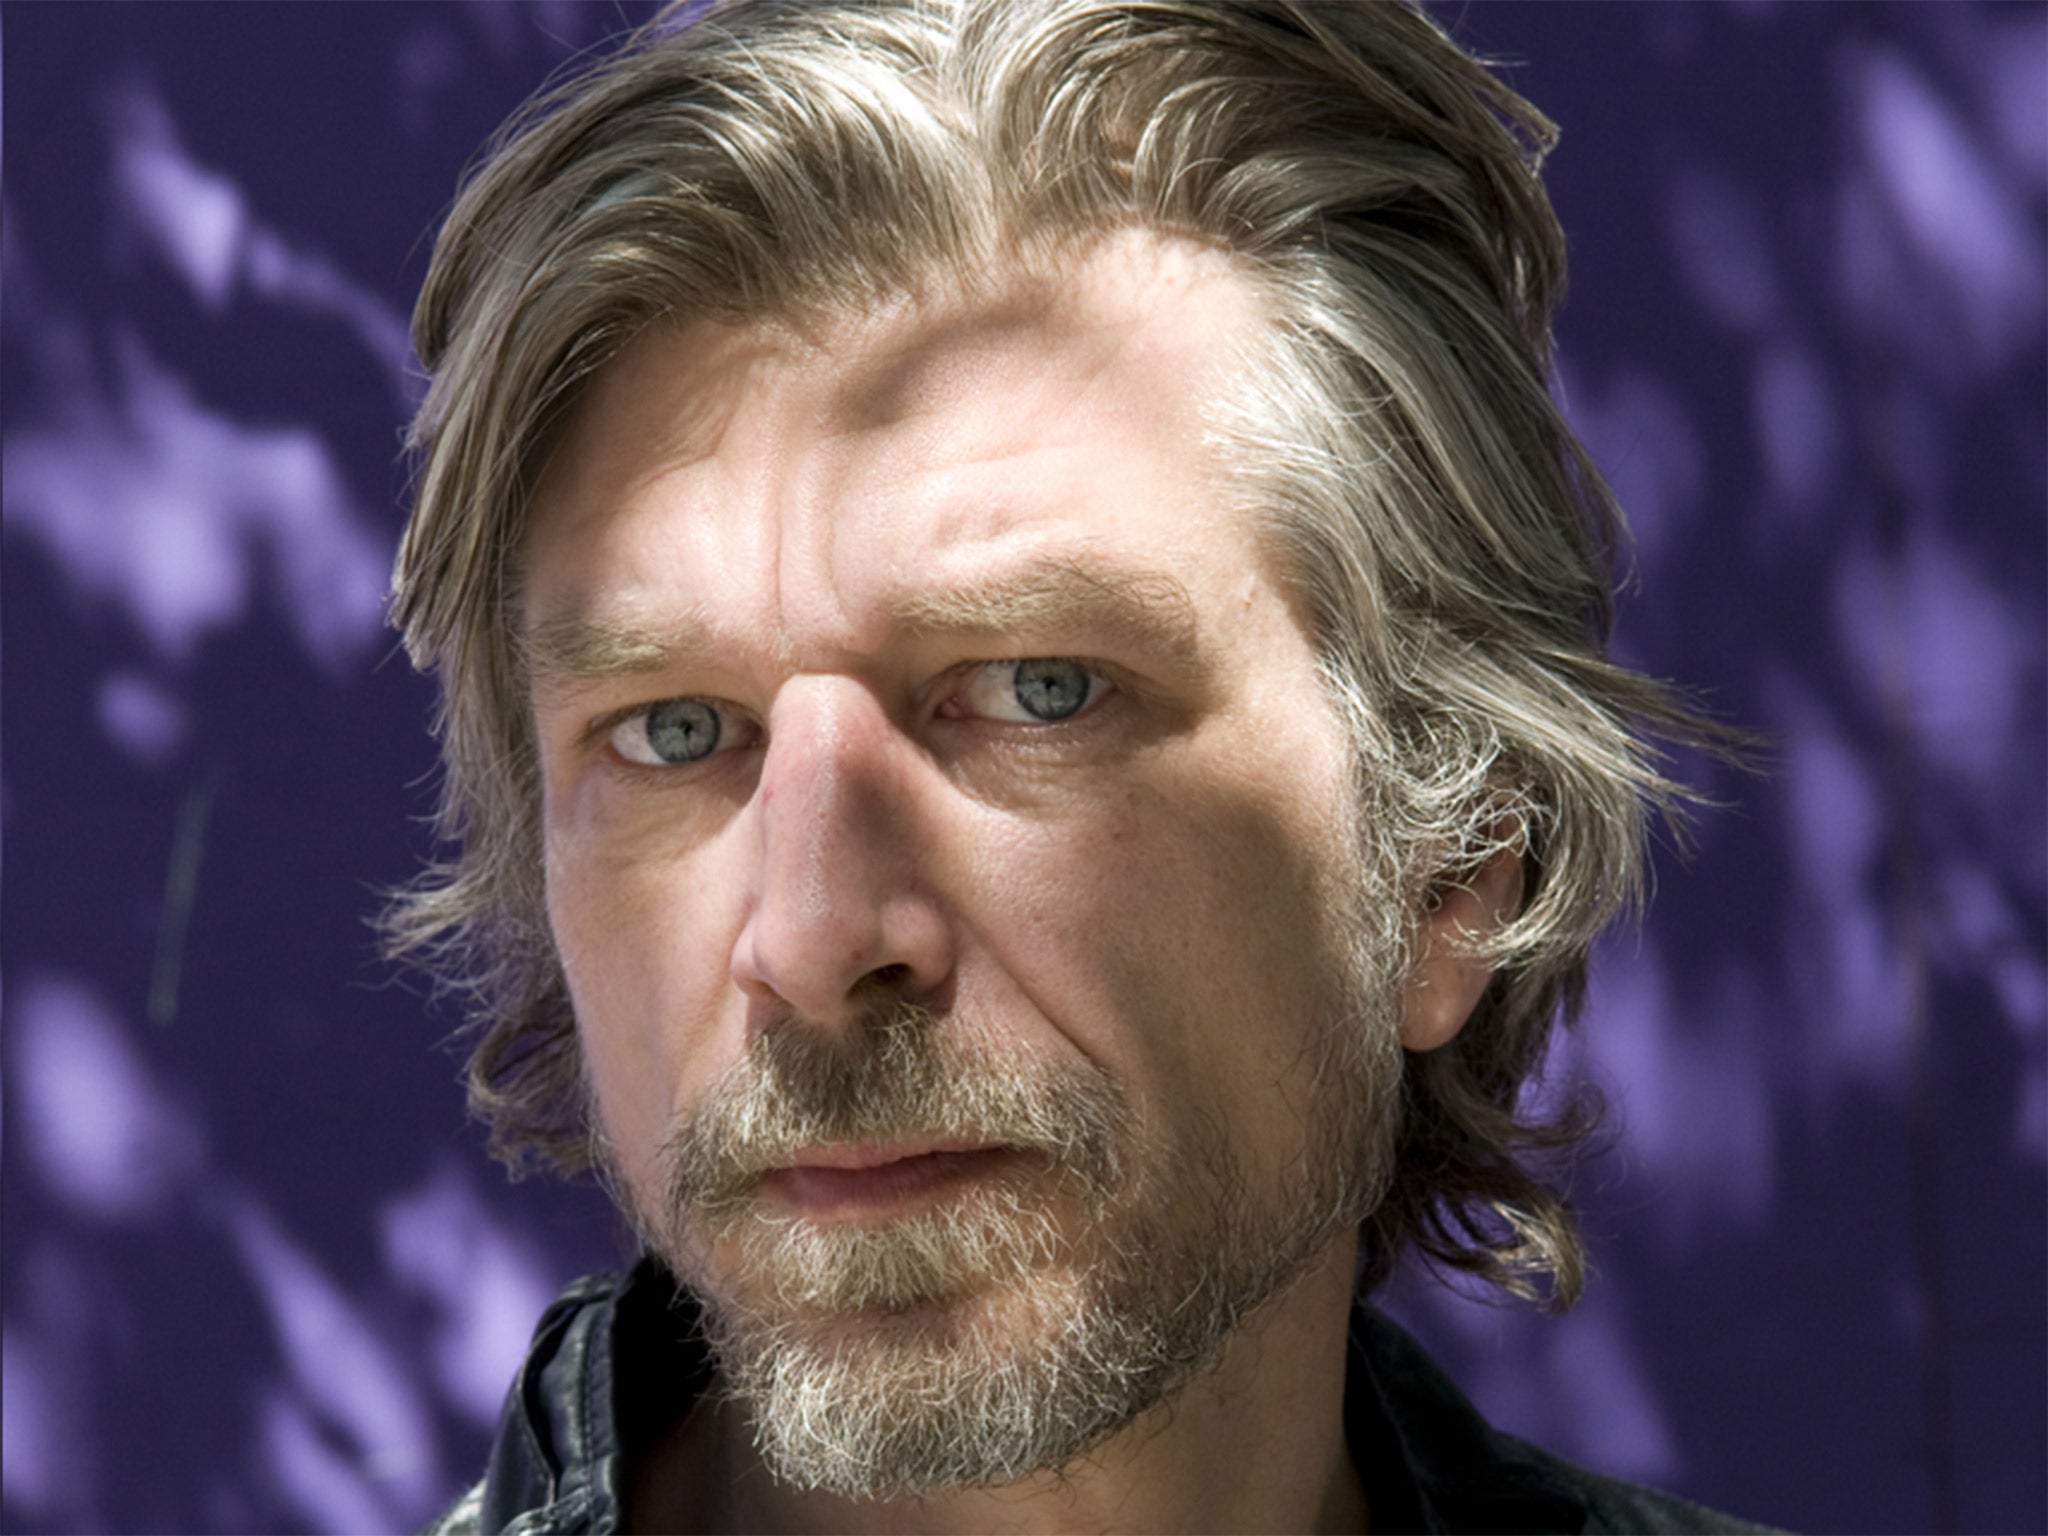 Karl Ove Knausgaard, described as ‘Norway’s Proust’, is longlisted for the Foreign Fiction Prize